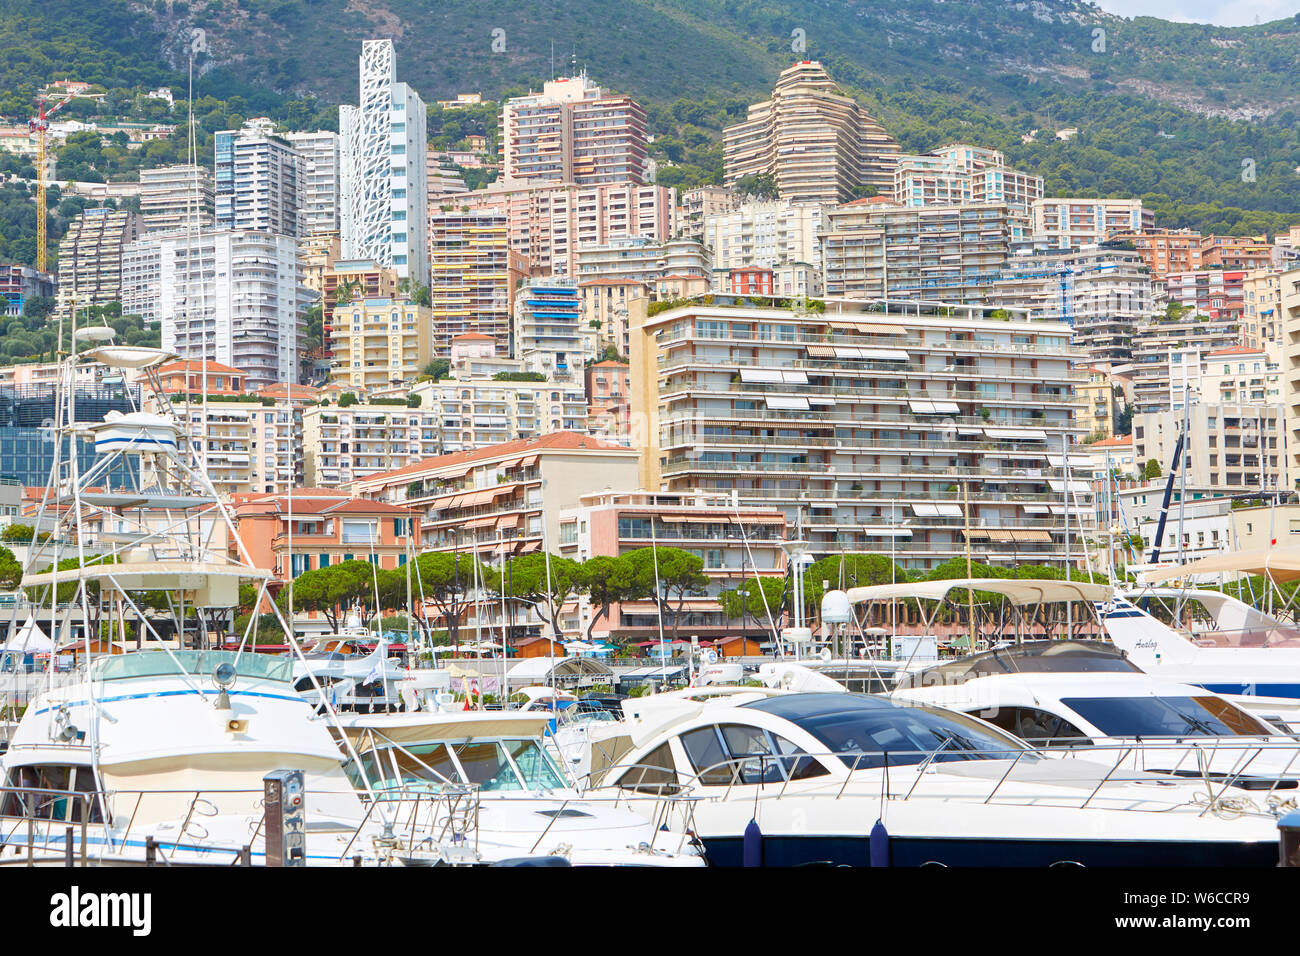 MONTE CARLO, MONACO - AUGUST 20, 2016: Monte Carlo harbor with boats, luxury yachts and city buildings in a summer day in Monte Carlo, Monaco. Stock Photo